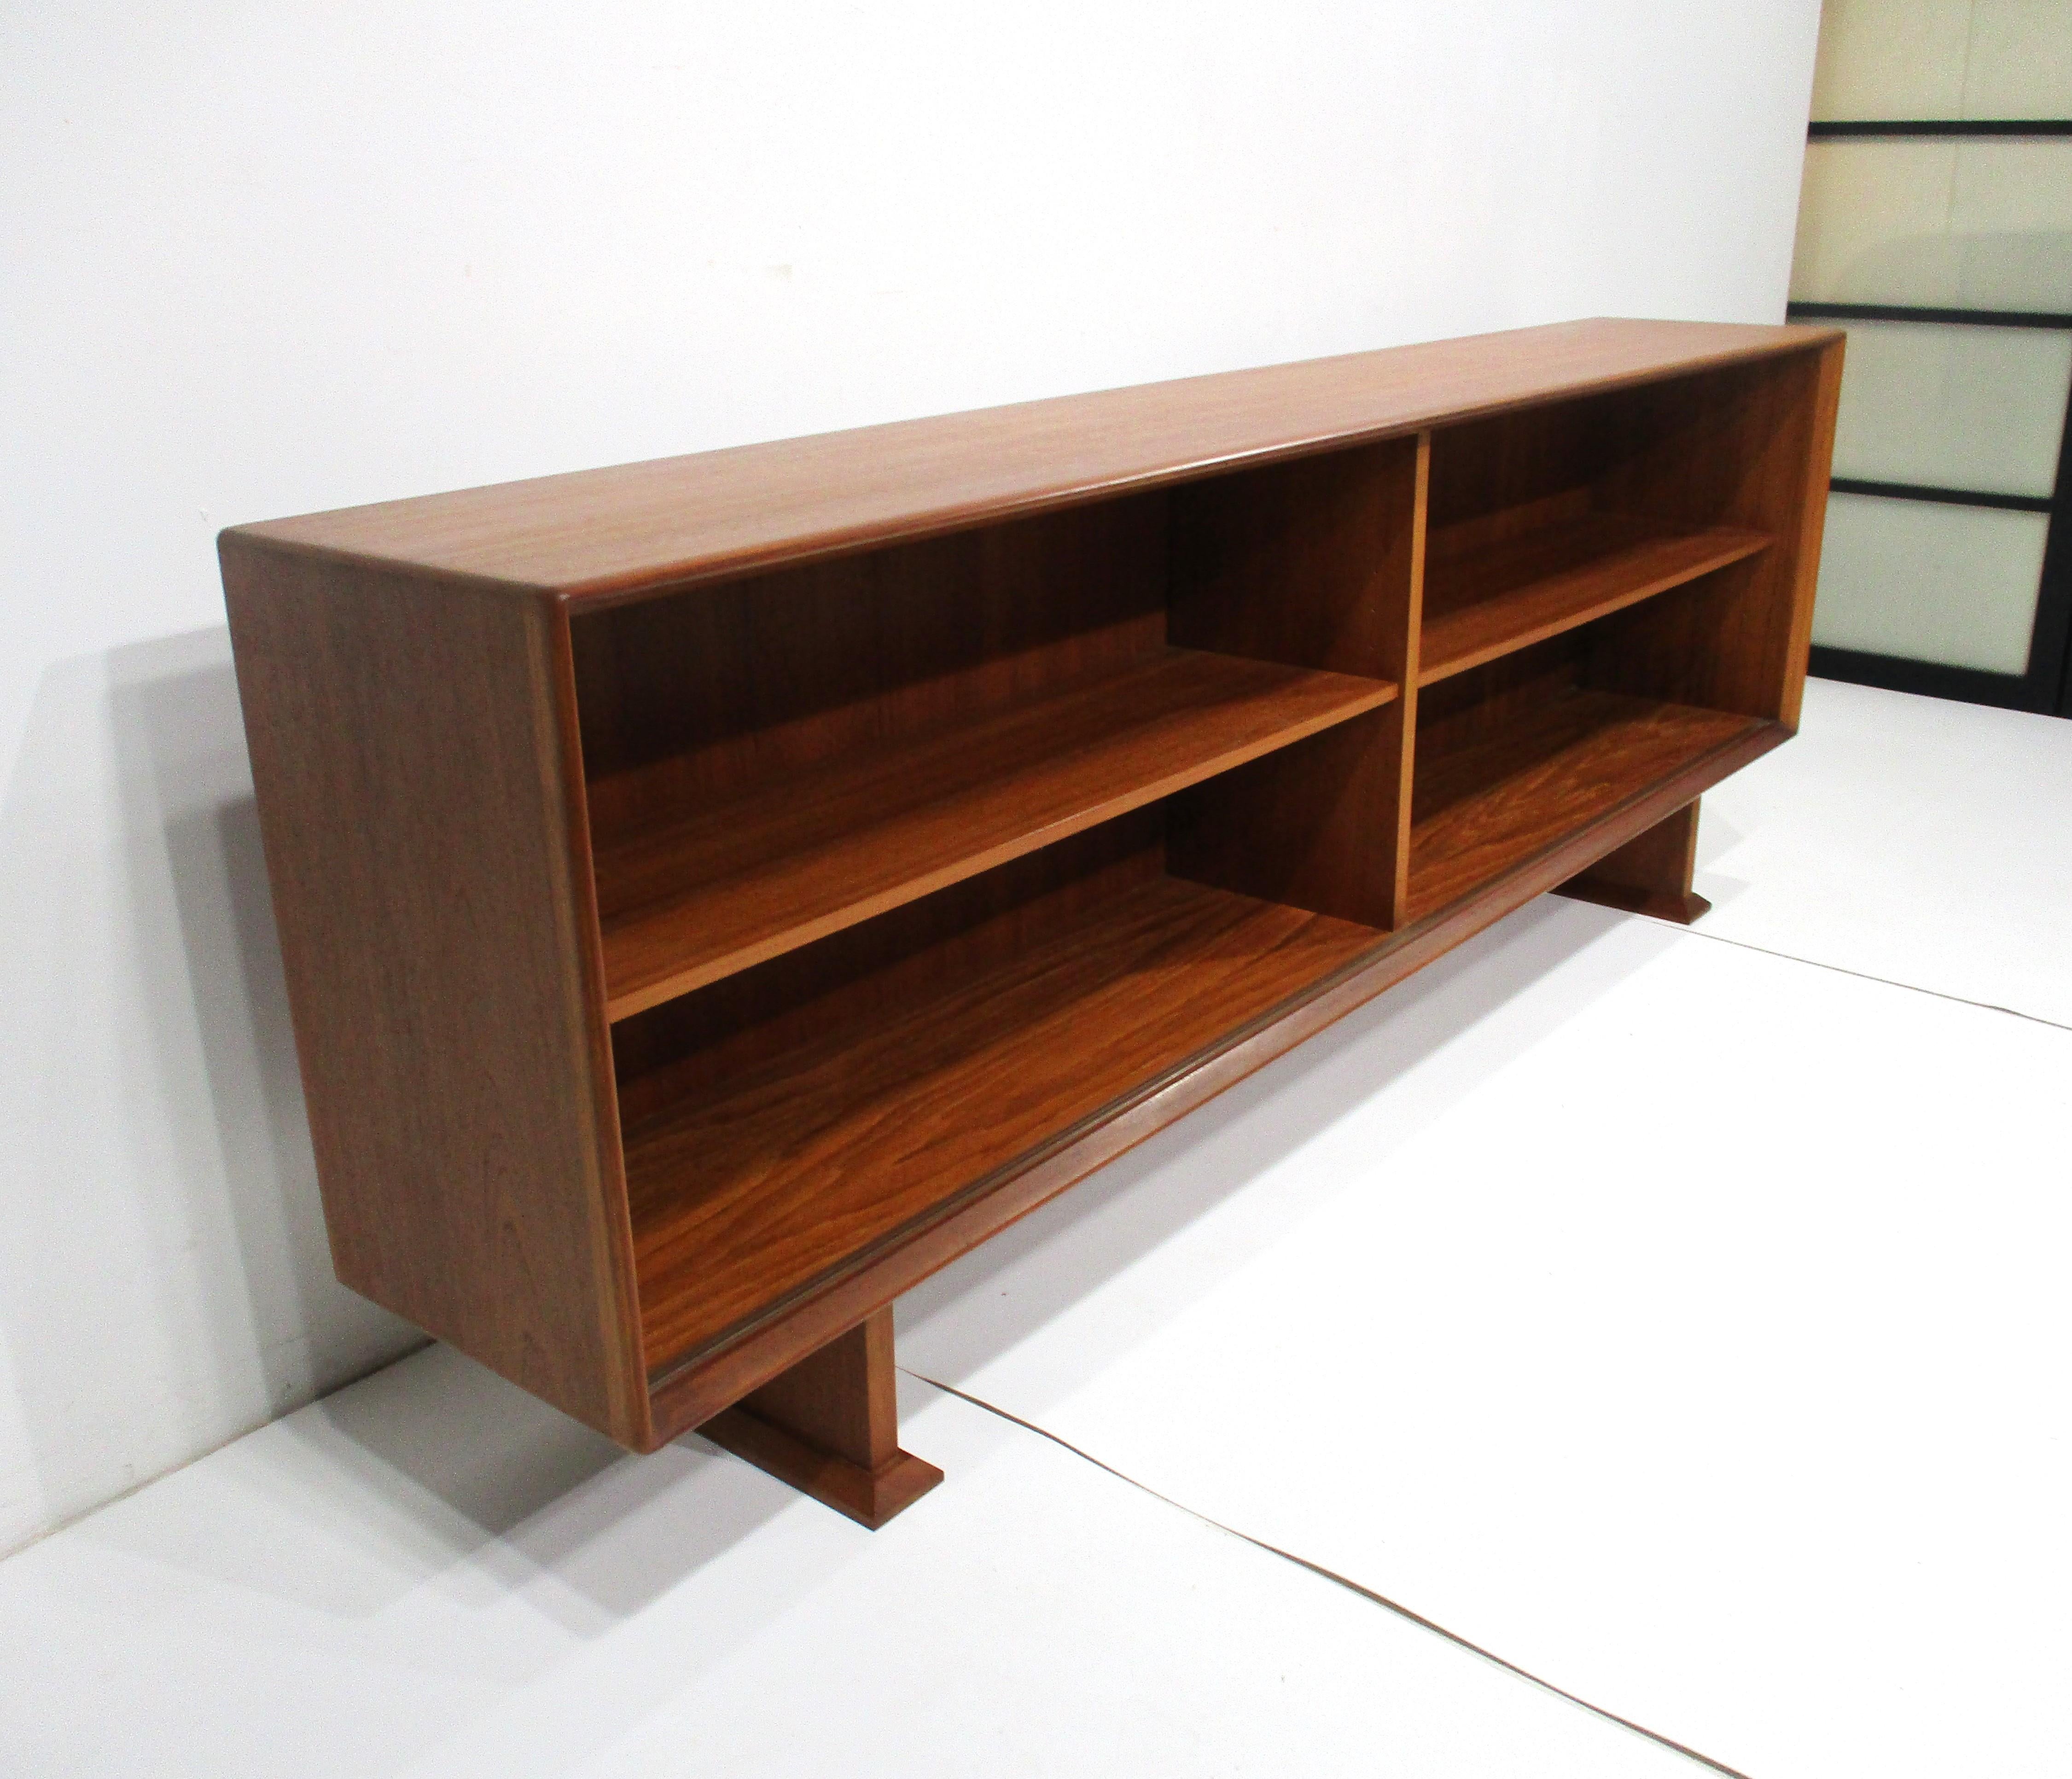 A well crafted teak wood bookcase with two adjustable matching shelves having the perfect size and proportions for book storage . Designed by Henry Rosengren Hansen imported by Dylund and made in Denmark , includes two sliding glass doors to protect